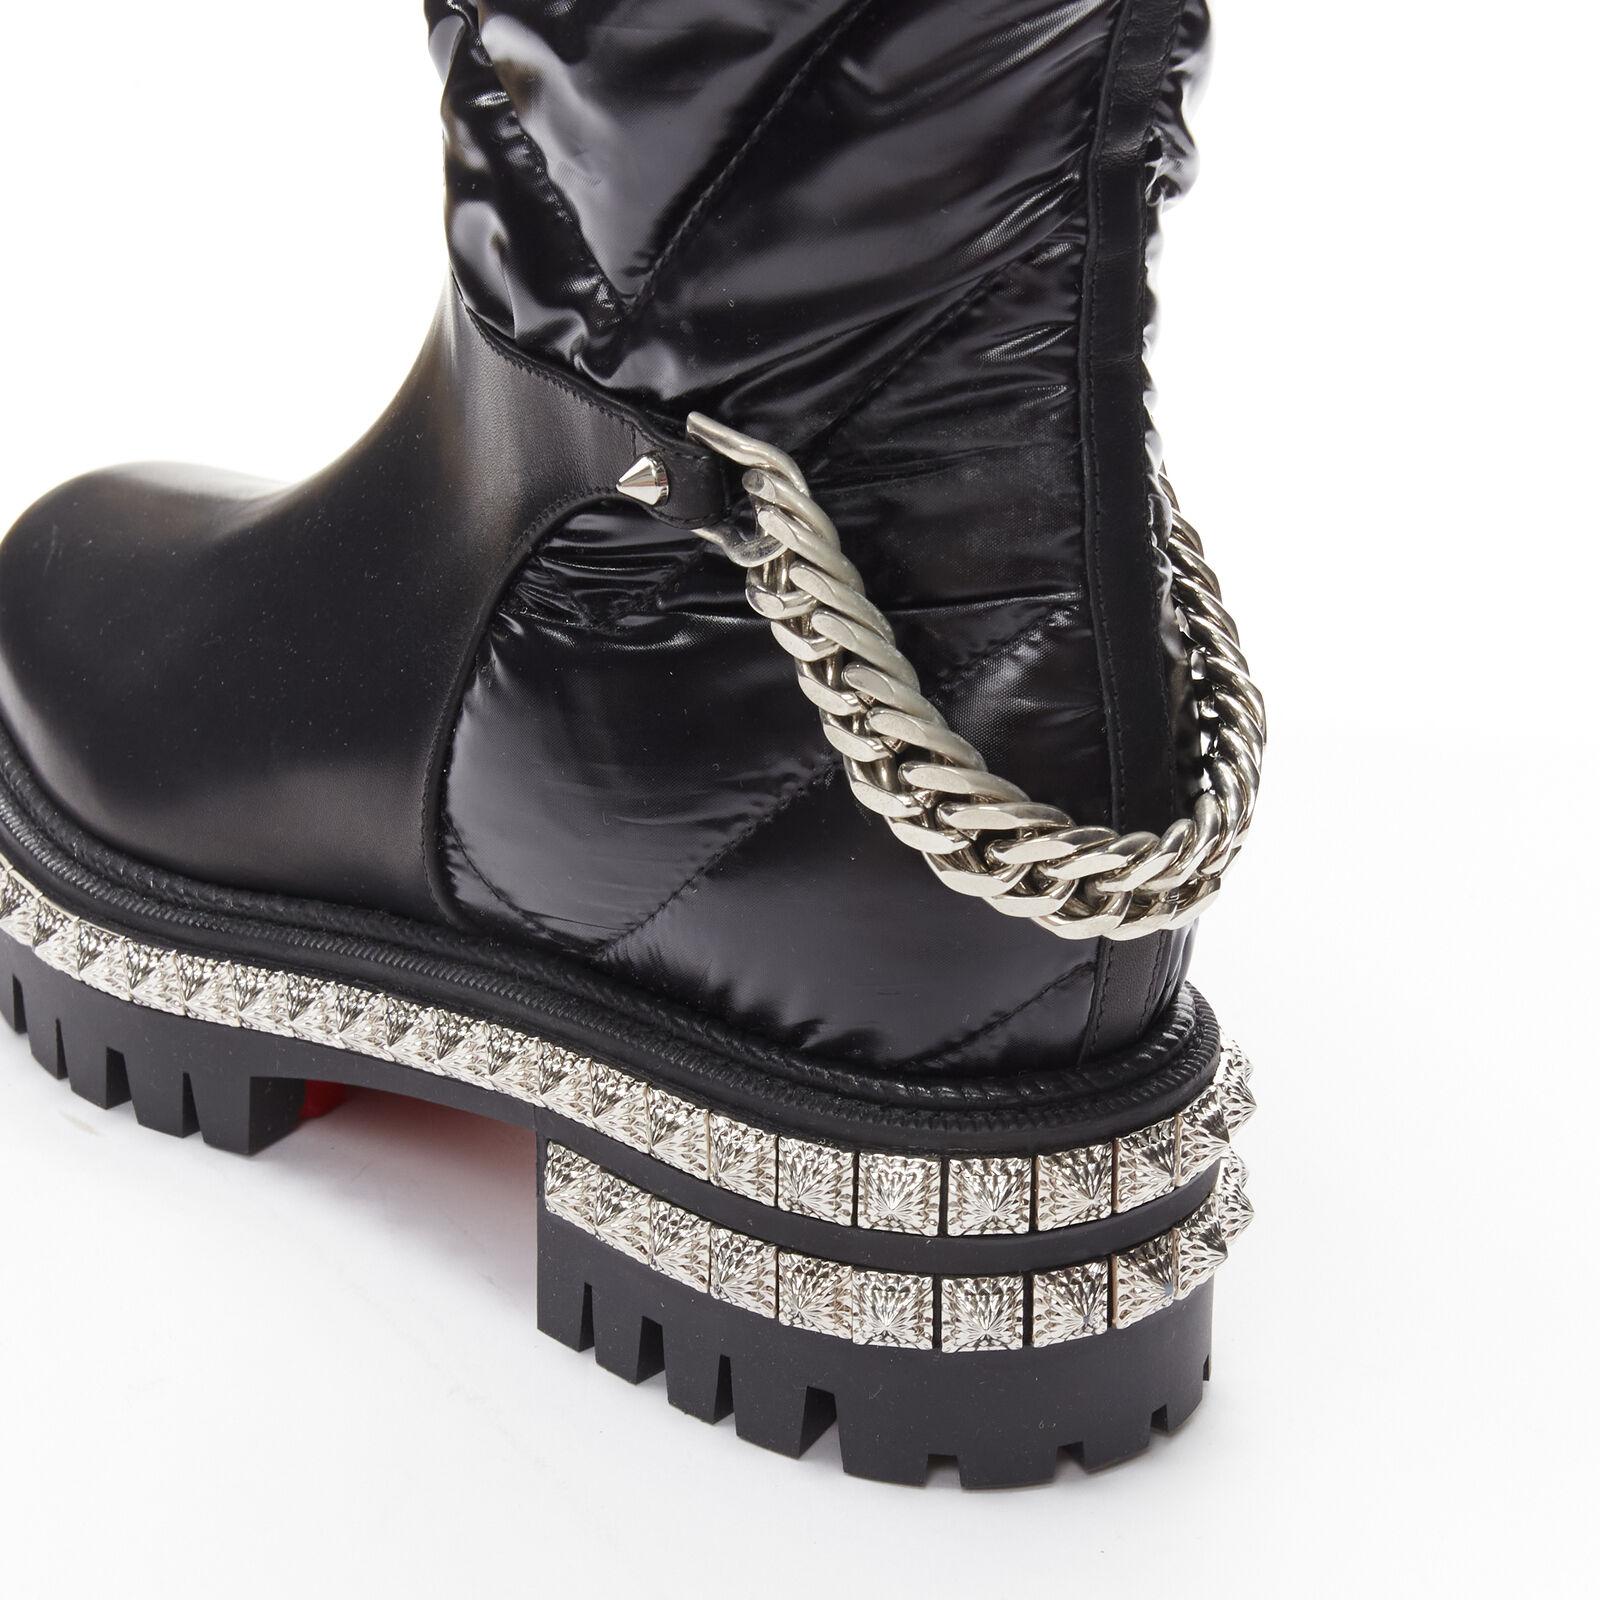 new CHRISTIAN LOUBOUTIN Verdonna Flat black nylon duvet chain studded boot EU37
Reference: TGAS/C01485
Brand: Christian Louboutin
Model: Verdonna Flat
Material: Calfskin Leather, Down
Color: Black, Silver
Pattern: Solid
Closure: Pull On
Lining: